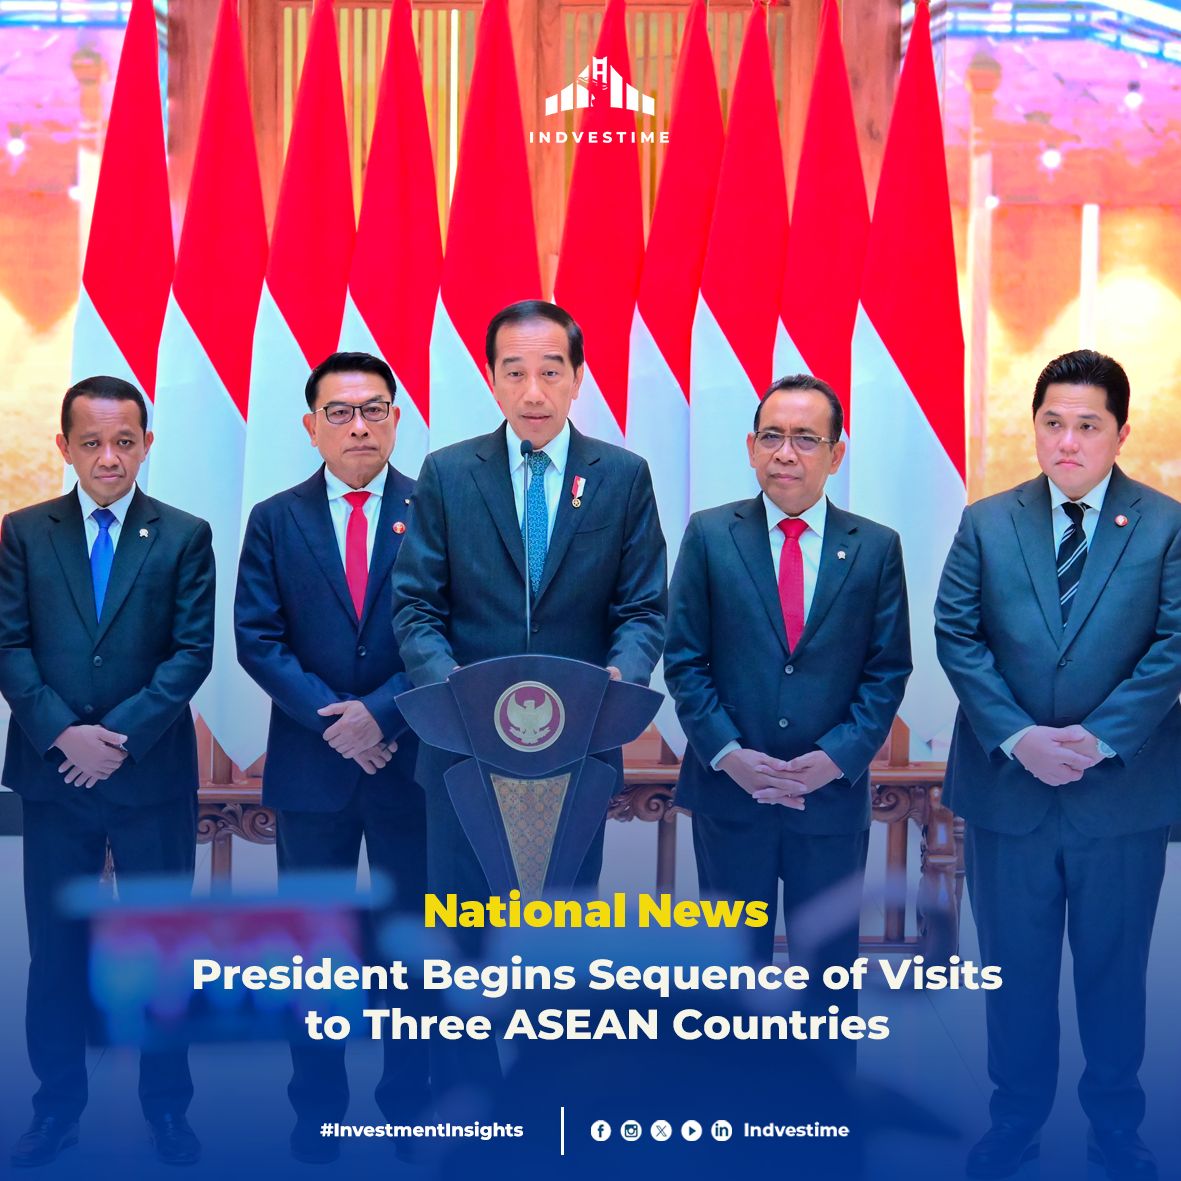 President Joko Widodo kicks off a diplomatic trip to strengthen ties in Southeast Asia! Excited to see the fruitful discussions and collaborations with Philippines, Vietnam, and Brunei. ASEAN unity in action! 🇮🇩🇵🇭🇻🇳🇧🇳 #DiplomaticMission #ASEANUnity #StrongerTogether